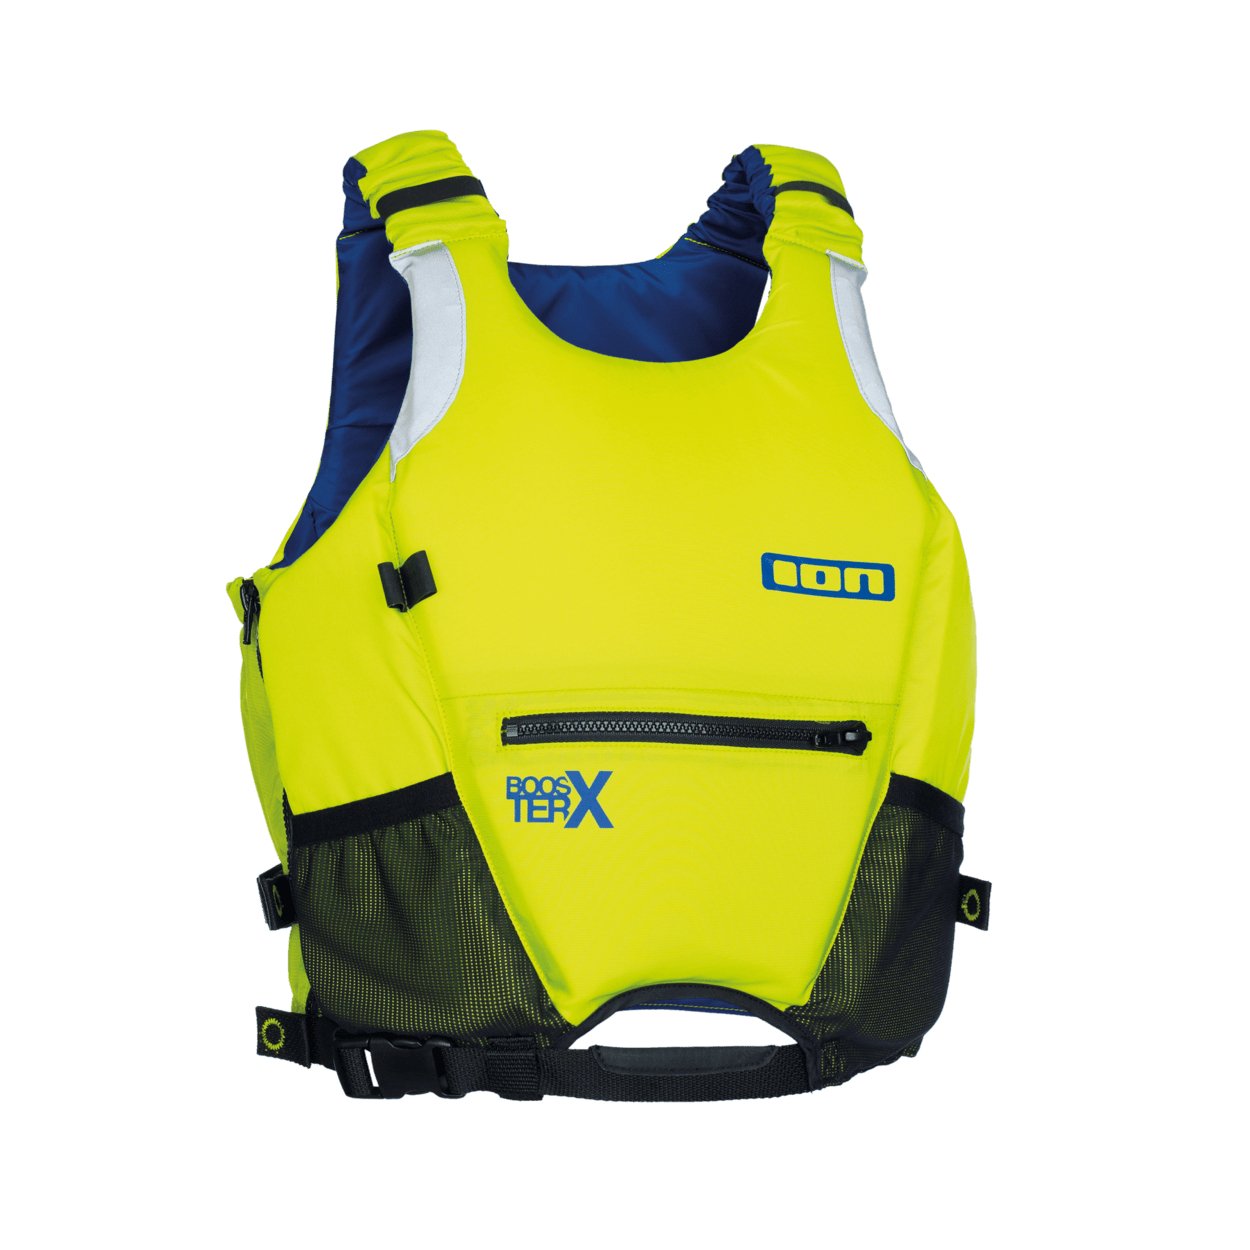 ION Booster Vest 50N SideZip unisex 2022 - Worthing Watersports - 9010583080154 - Protection - ION Water